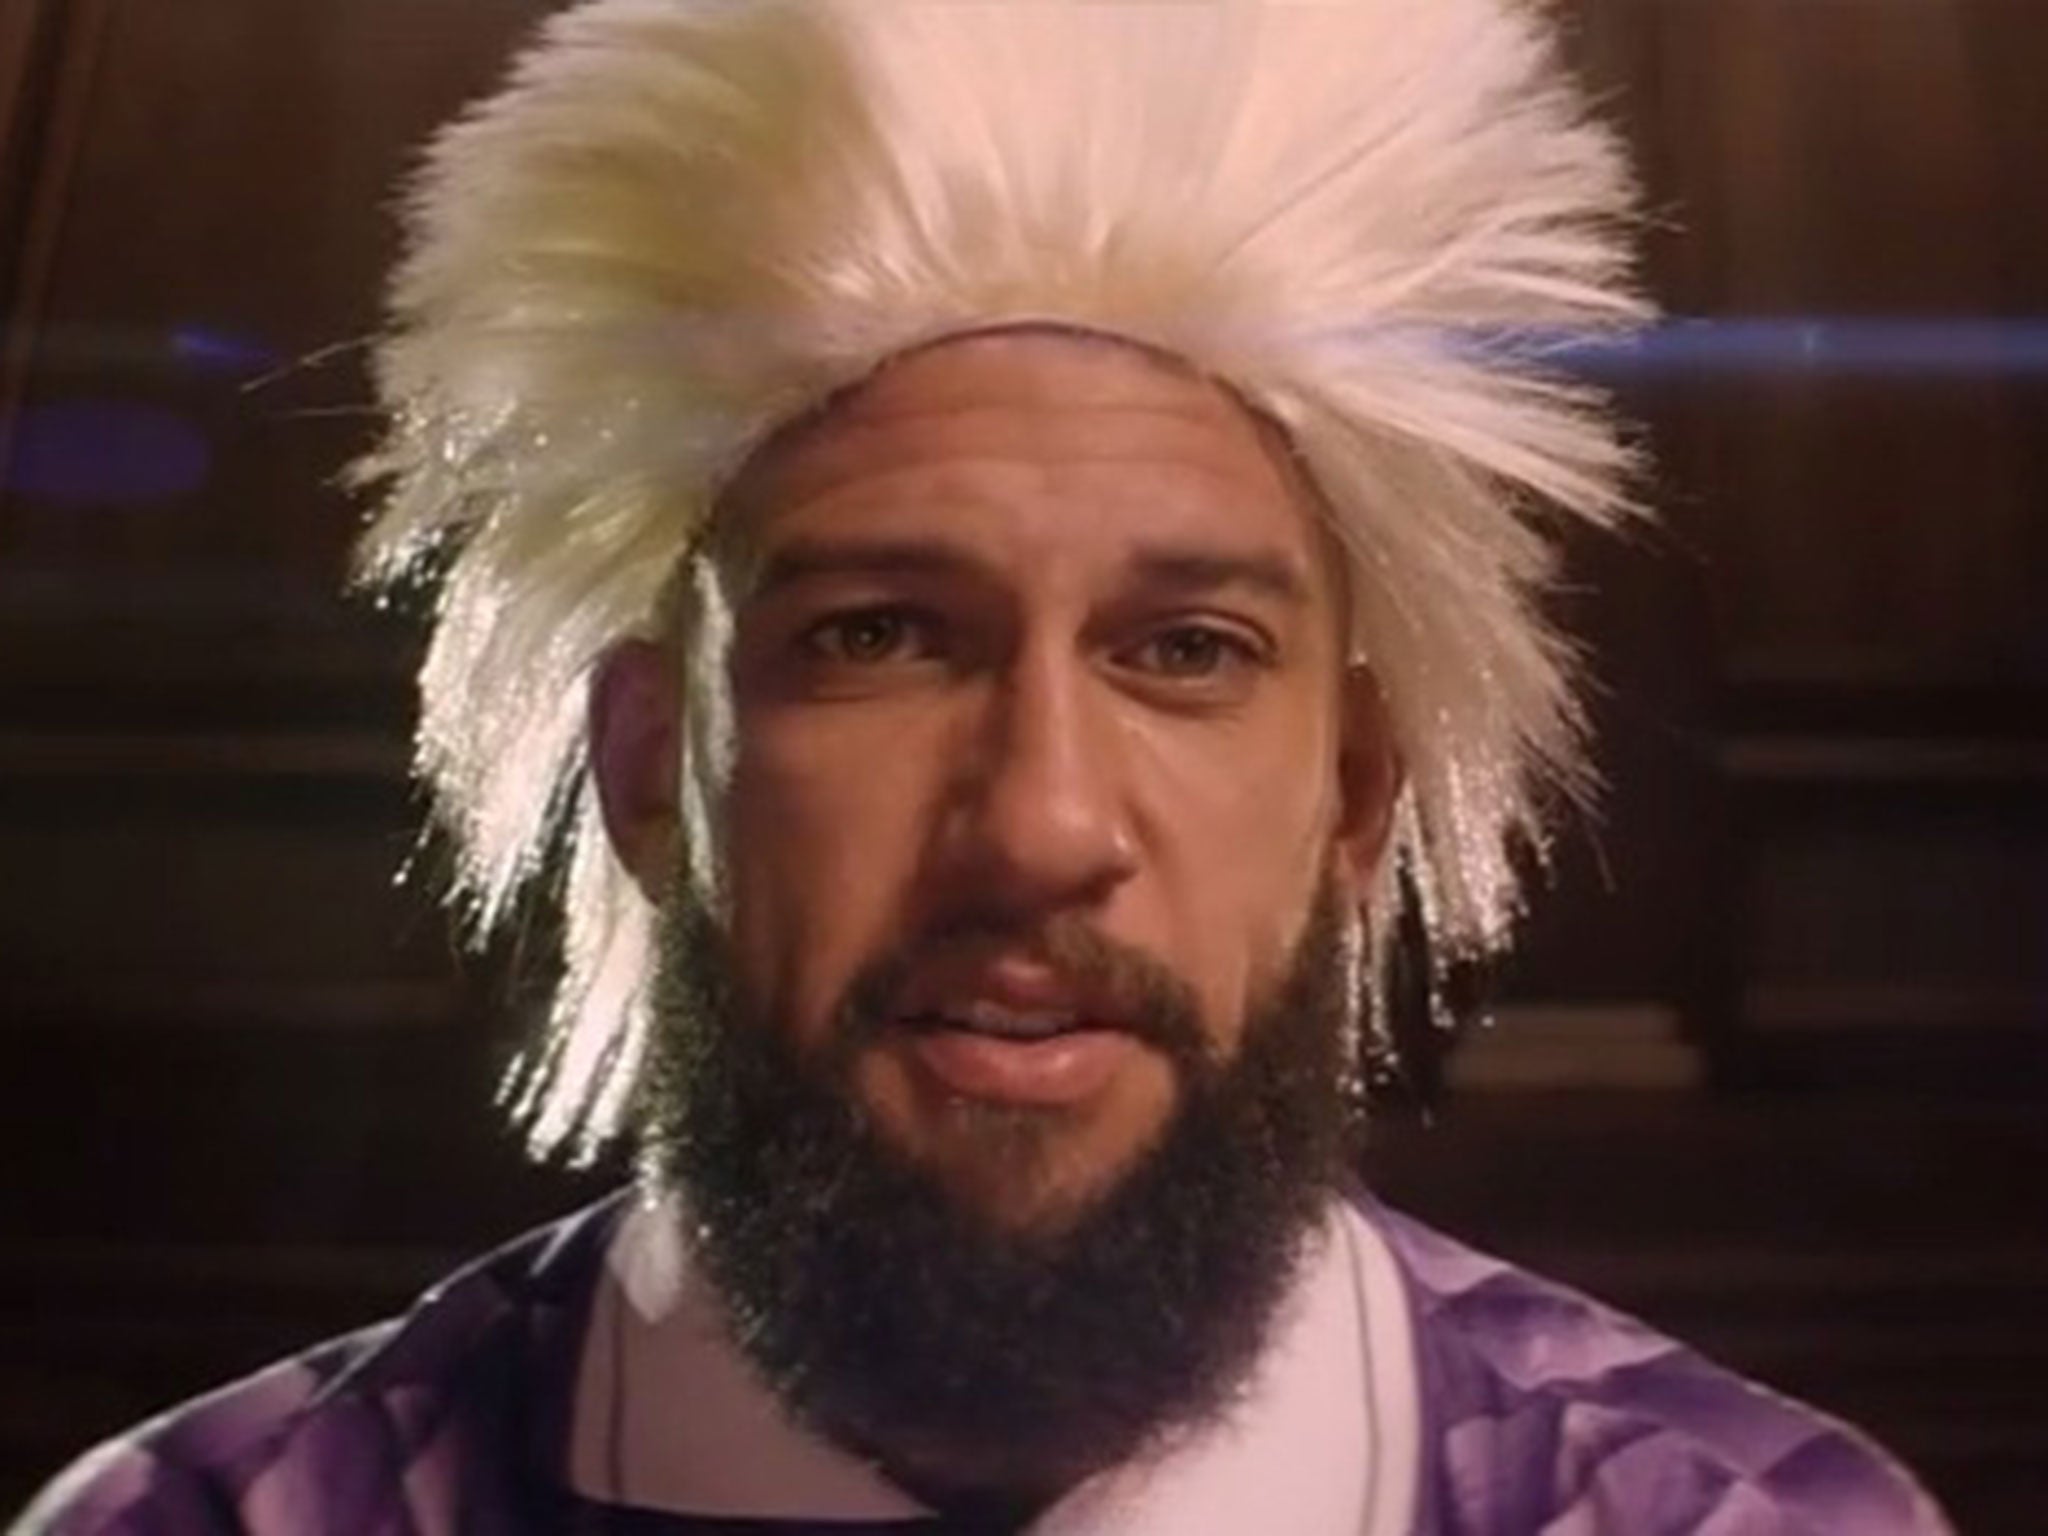 Tim Howard sports a wig in the Western Union advert